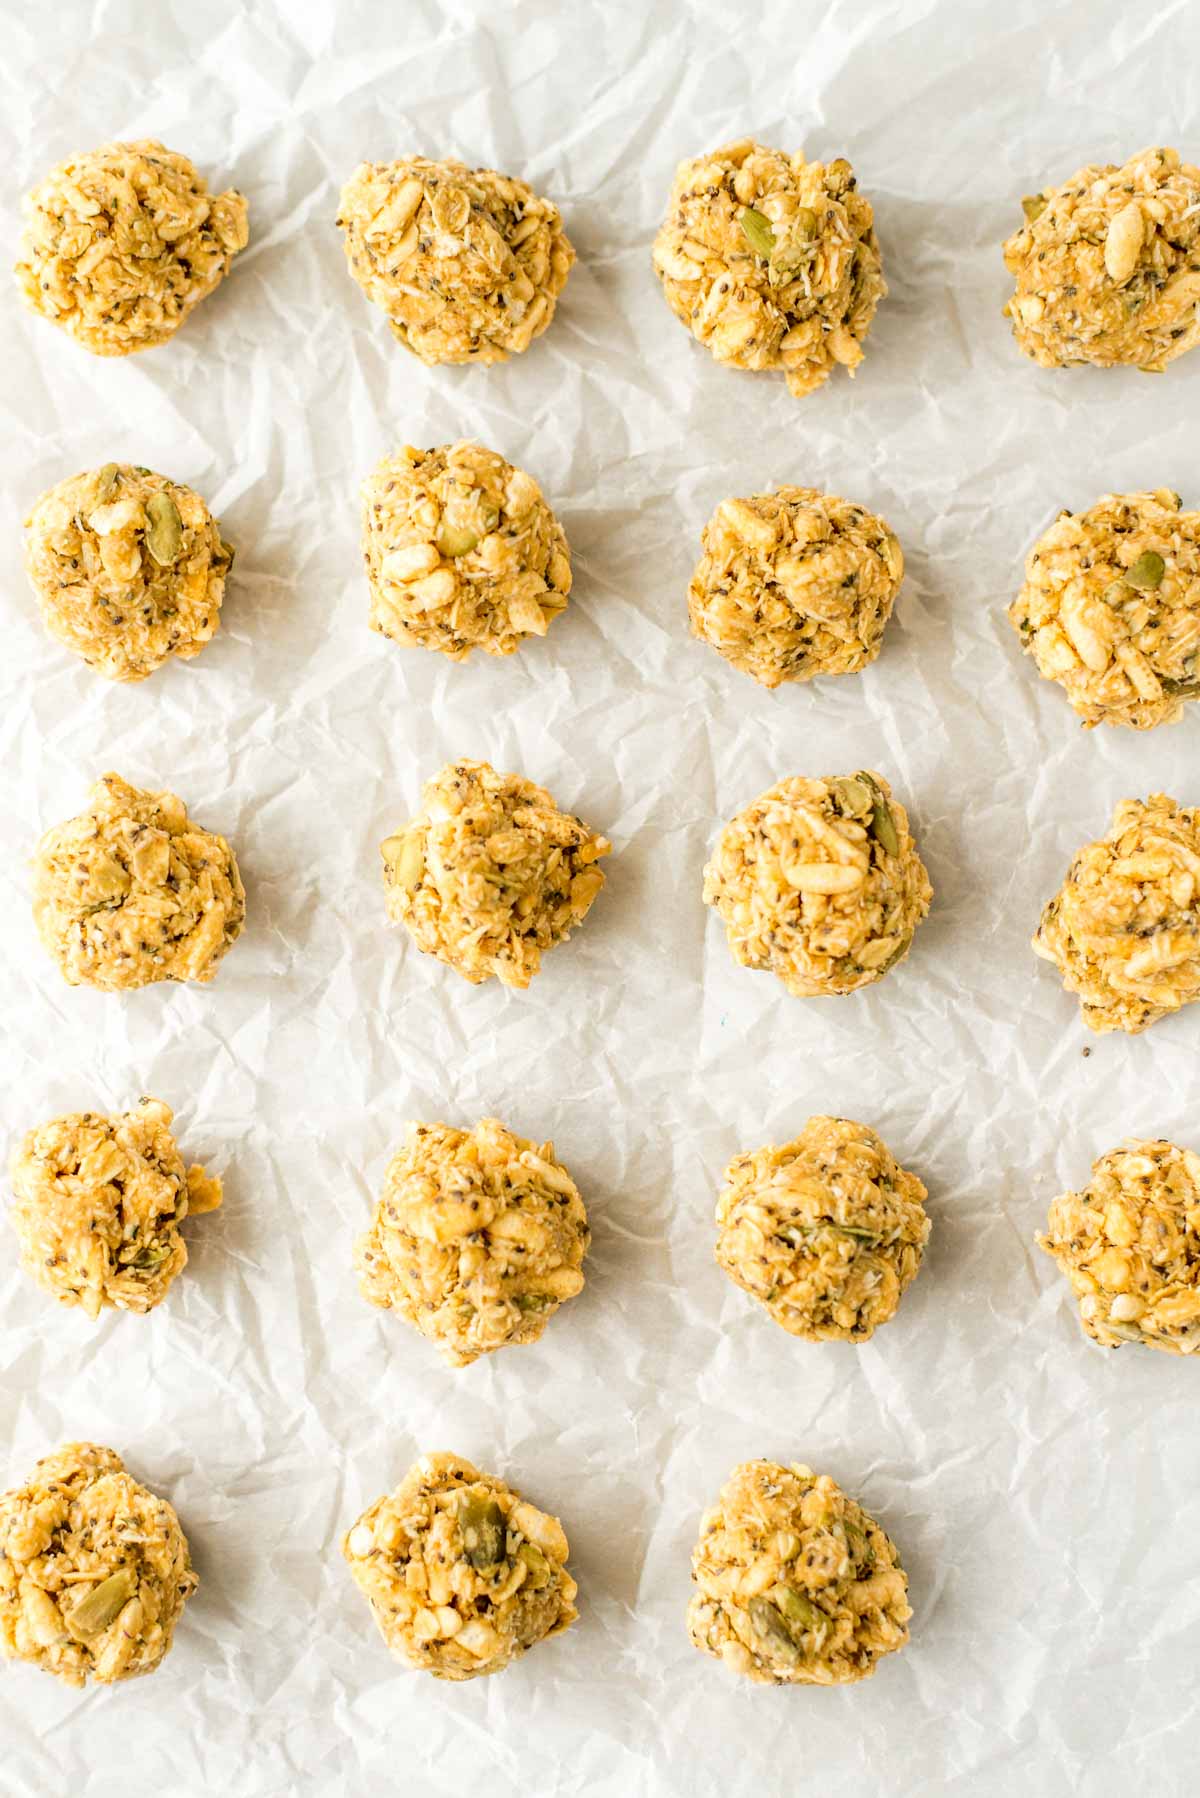 Healthy and homemade energy bites made in 10 minutes. This is the peanut butter chocolate treat you've been looking for. 